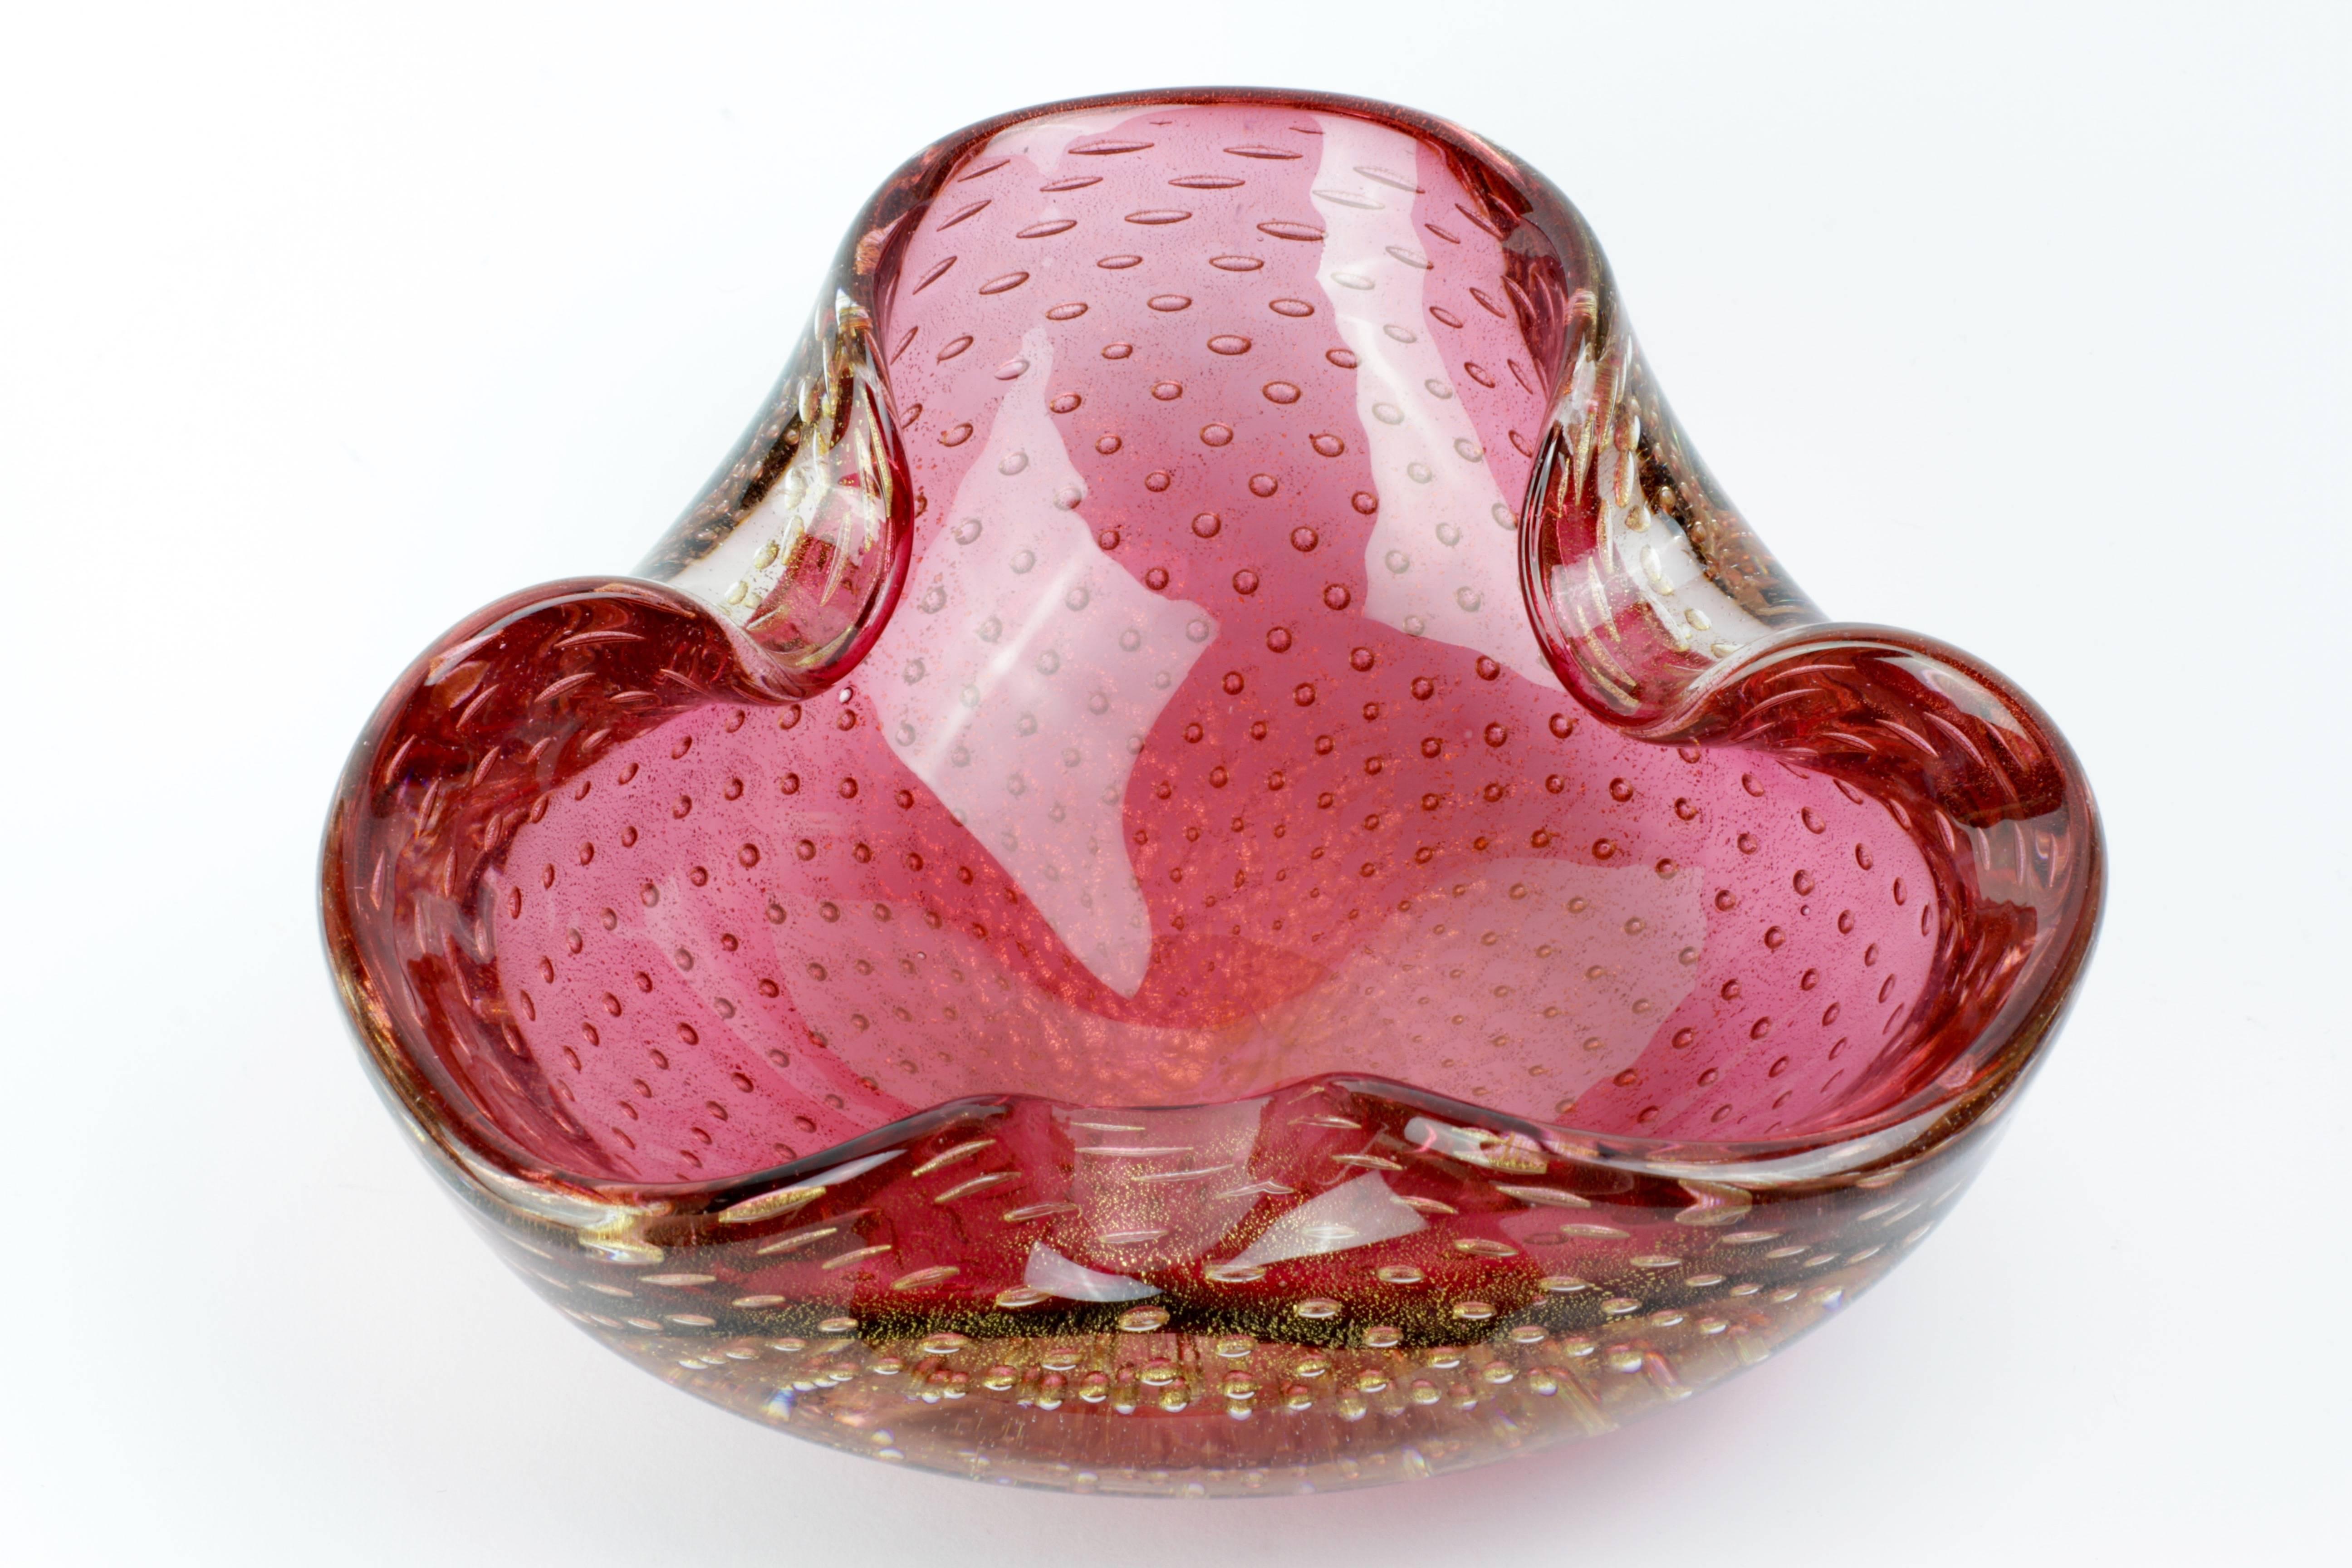 Mid-Century Modern 1950s Pink and Gold Biomorphic Bullicante Murano Glass Bowl Attributed to Scarpa